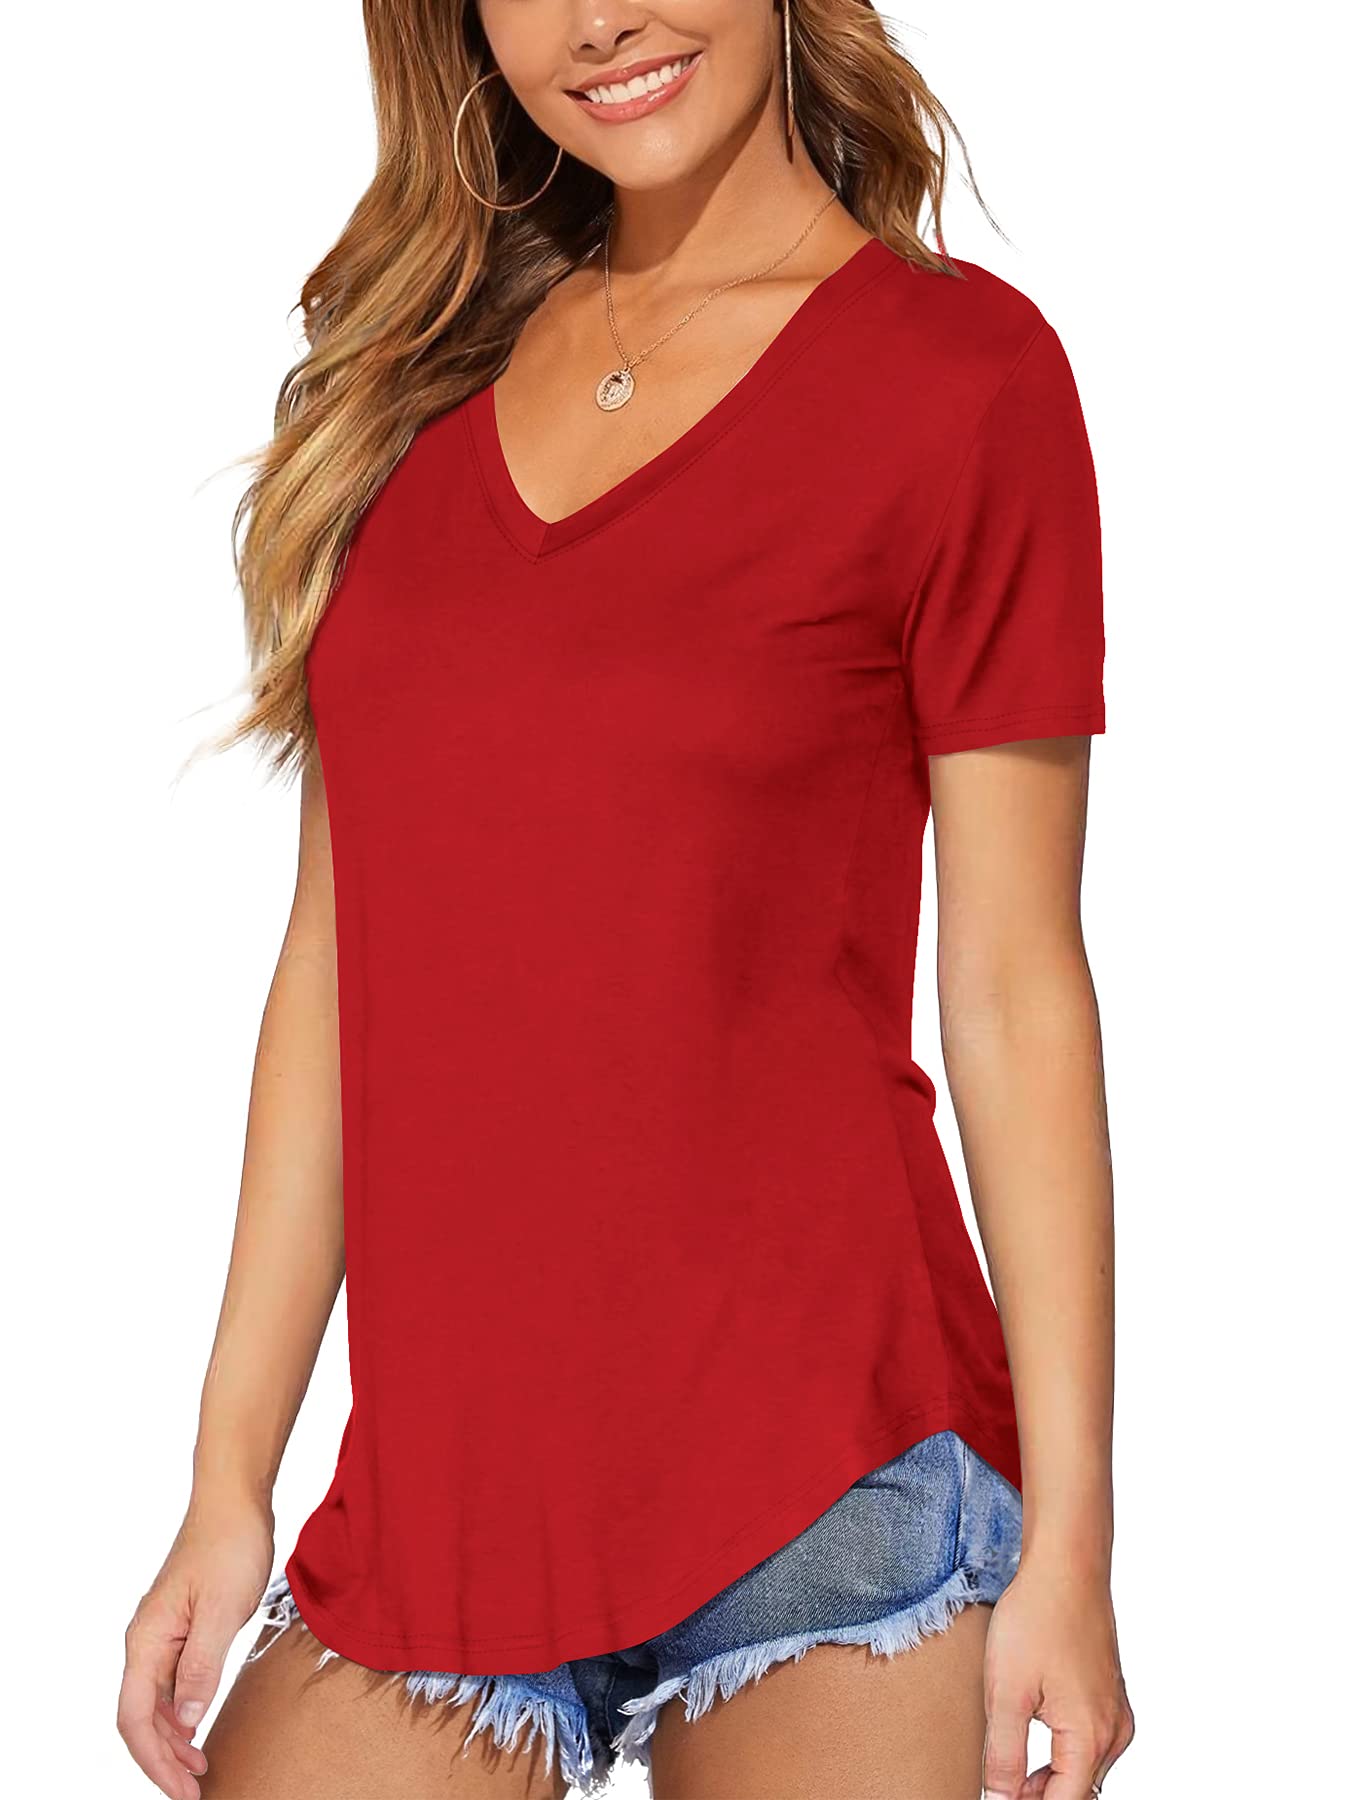 DittyandVibe Women Short Sleeve V Neck curved Hem Tunic Tops T Shirts (Red,S)